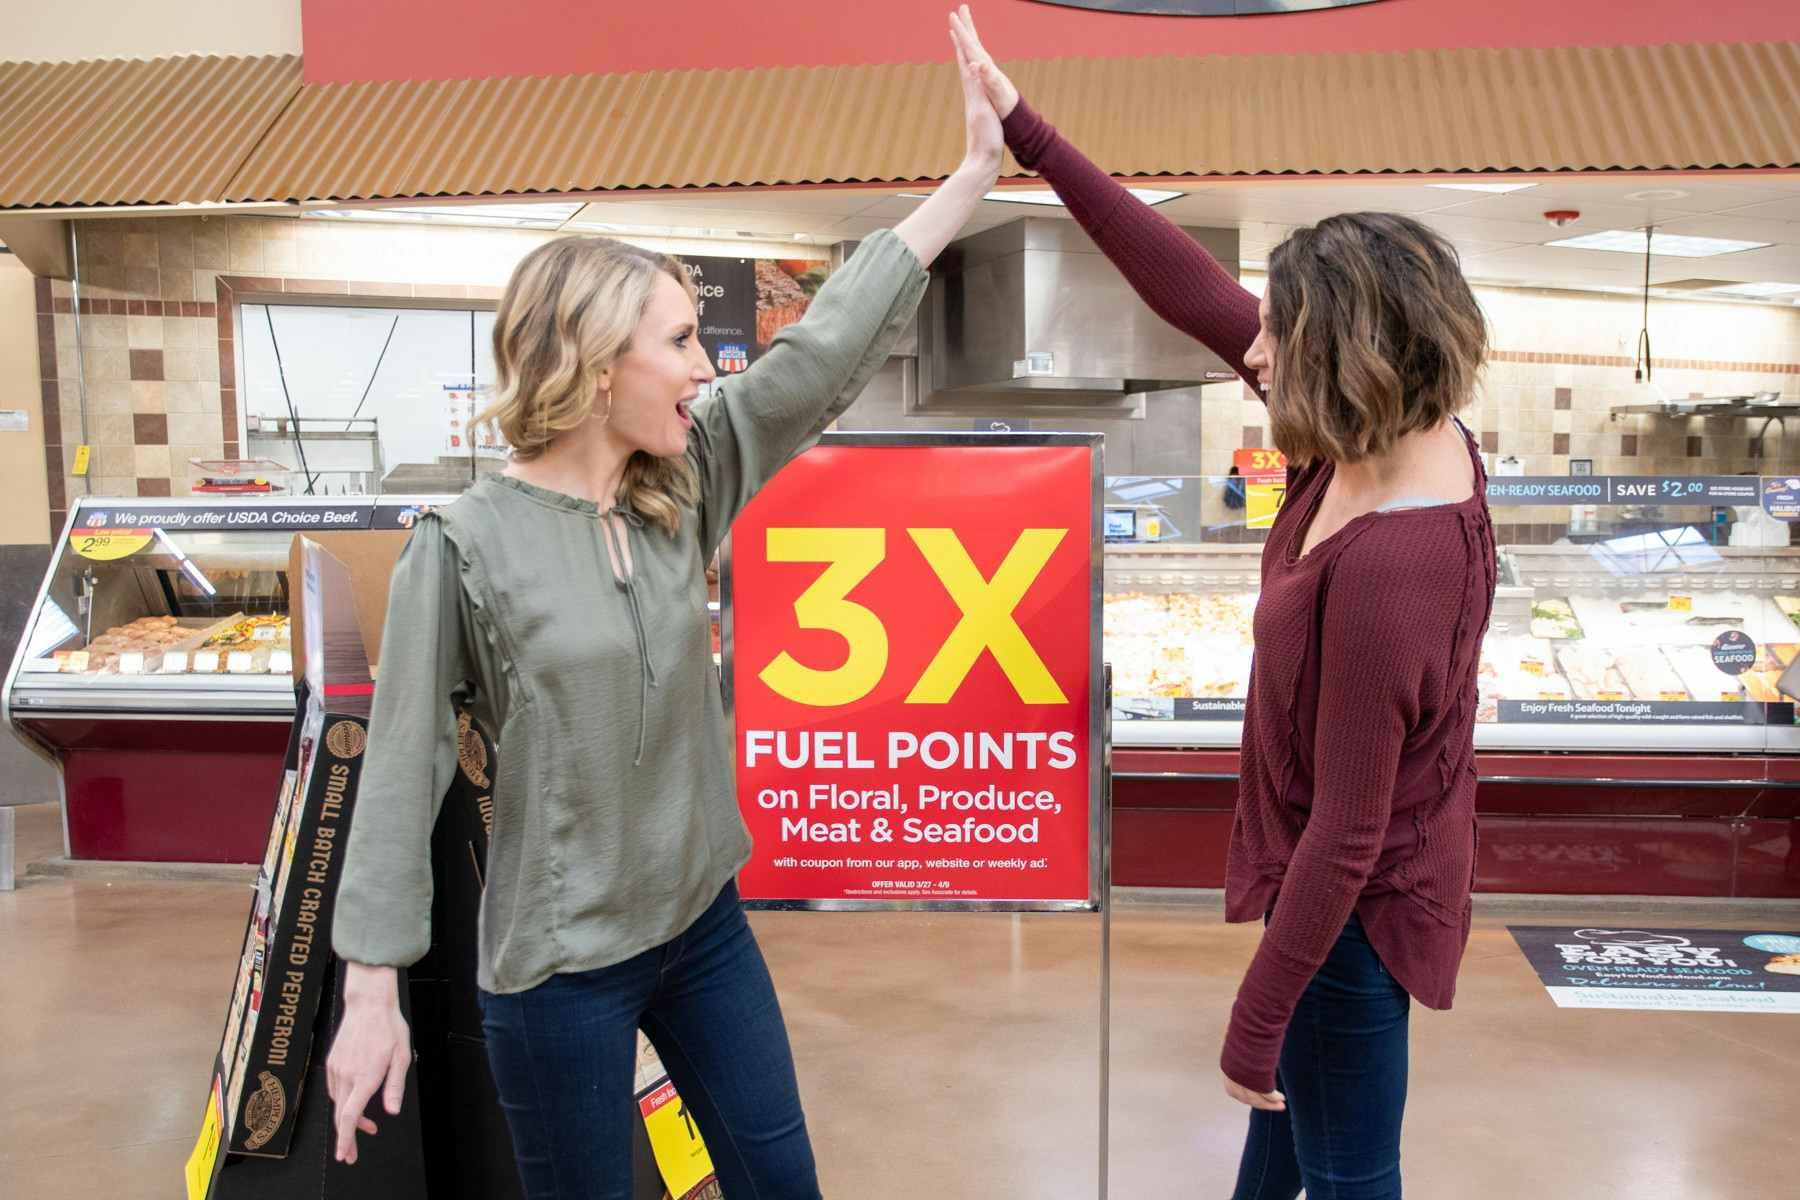 Find special promotions to earn more fuel points and check how many you have.